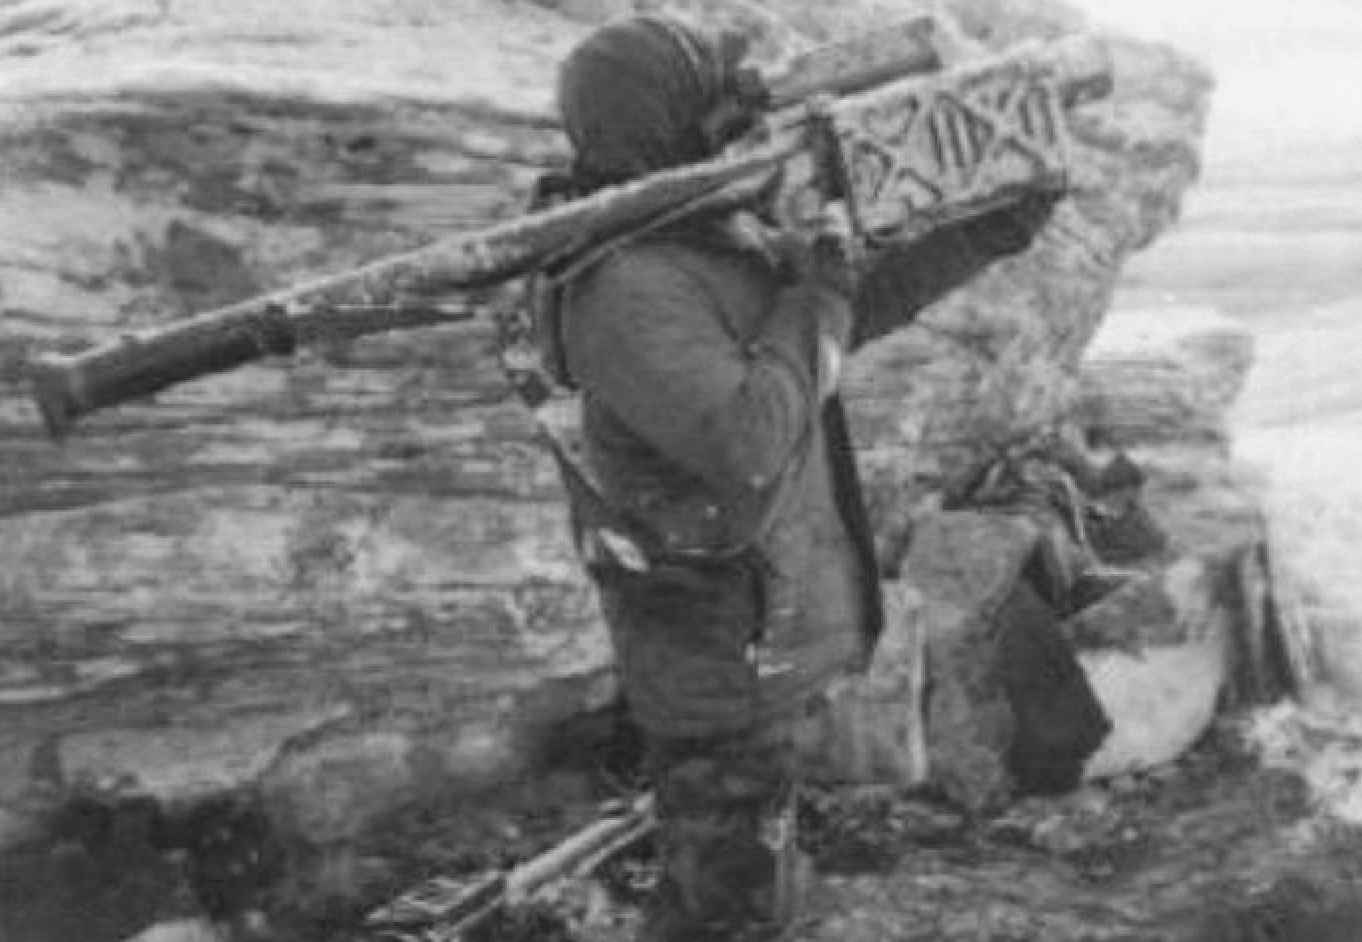 An SAS trooper with a Stinger missile. These were dropped by parachute before the landings, and D Squadron secured a first when they used one to shoot down an Argentine Pucara ground-attack aircraft. <em>via publisher</em>